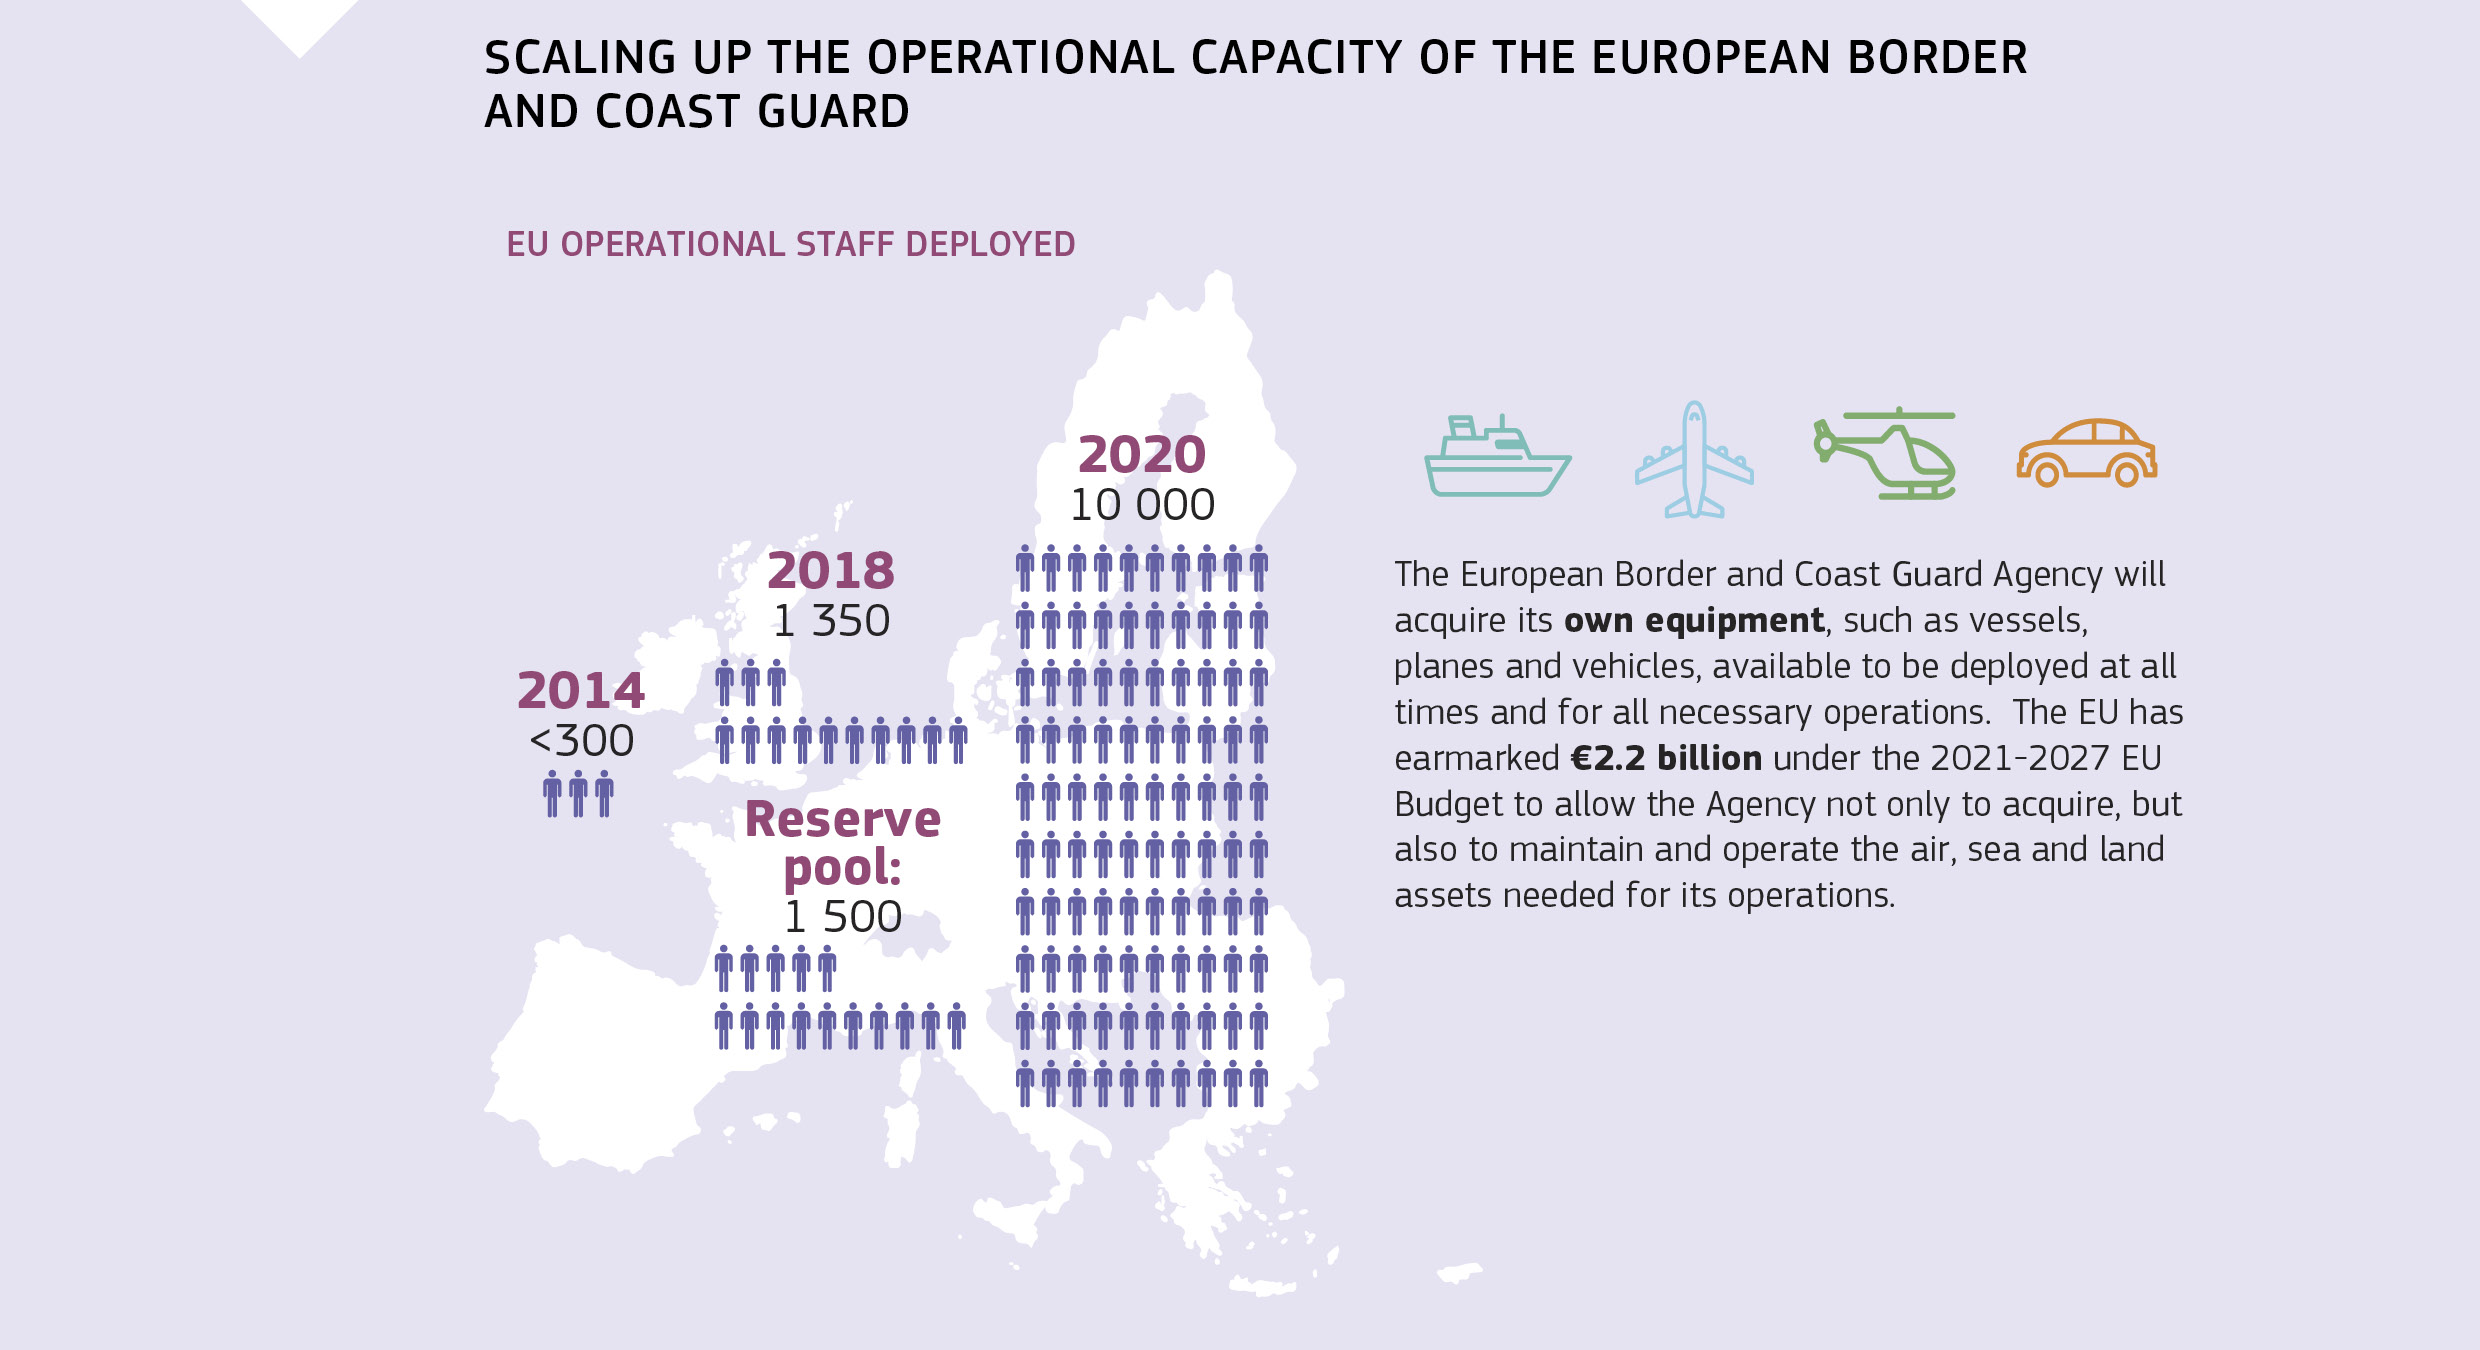 SCALING UP THE OPERATIONAL CAPACITY OF THE EUROPEAN BORDER AND COAST GUARD 